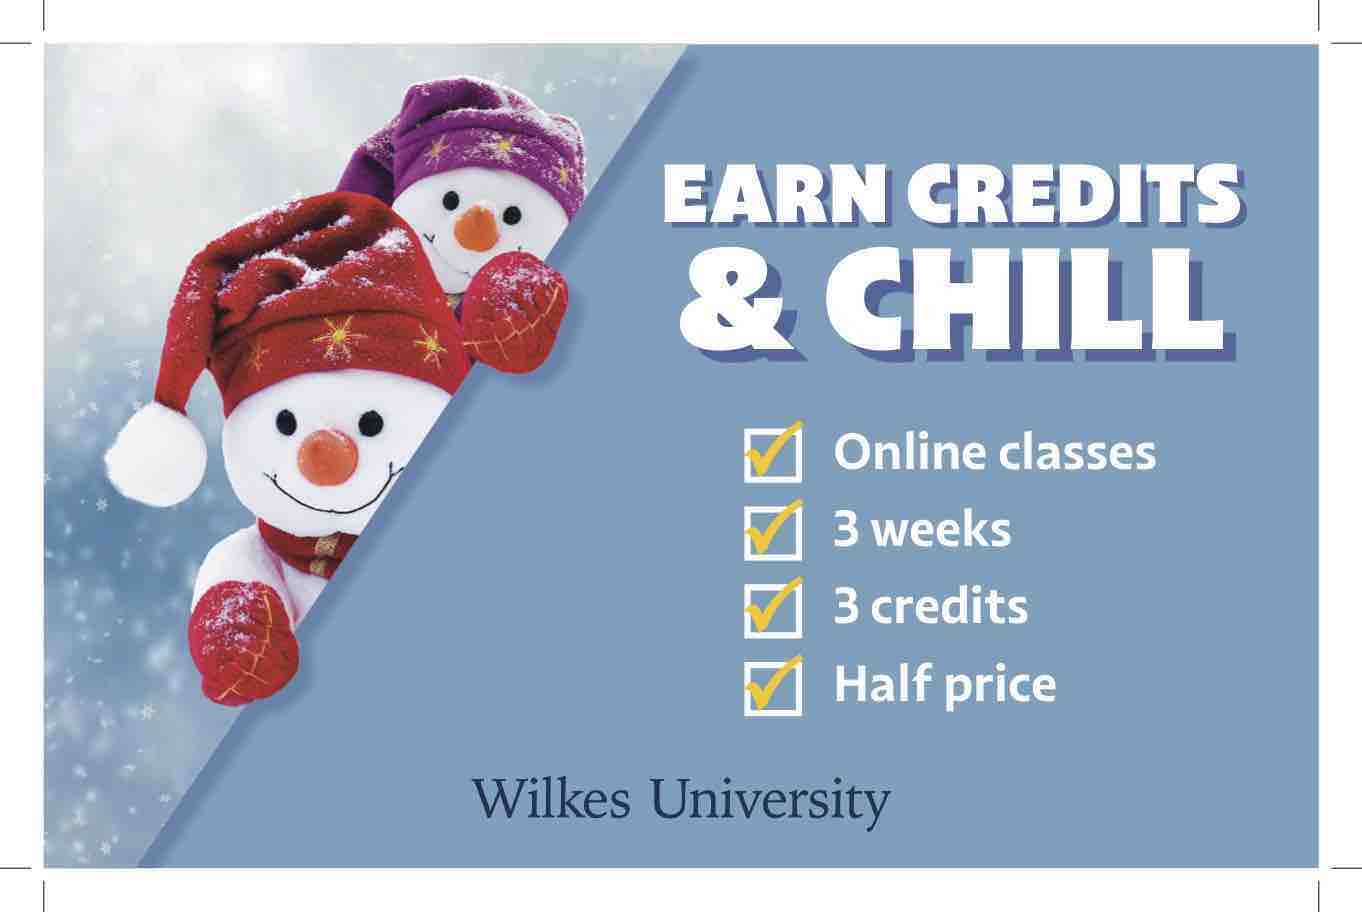 winter session postcard featuring two snowmen in hats and gloves peeking around a corner

text reads Earn Credits and Chill